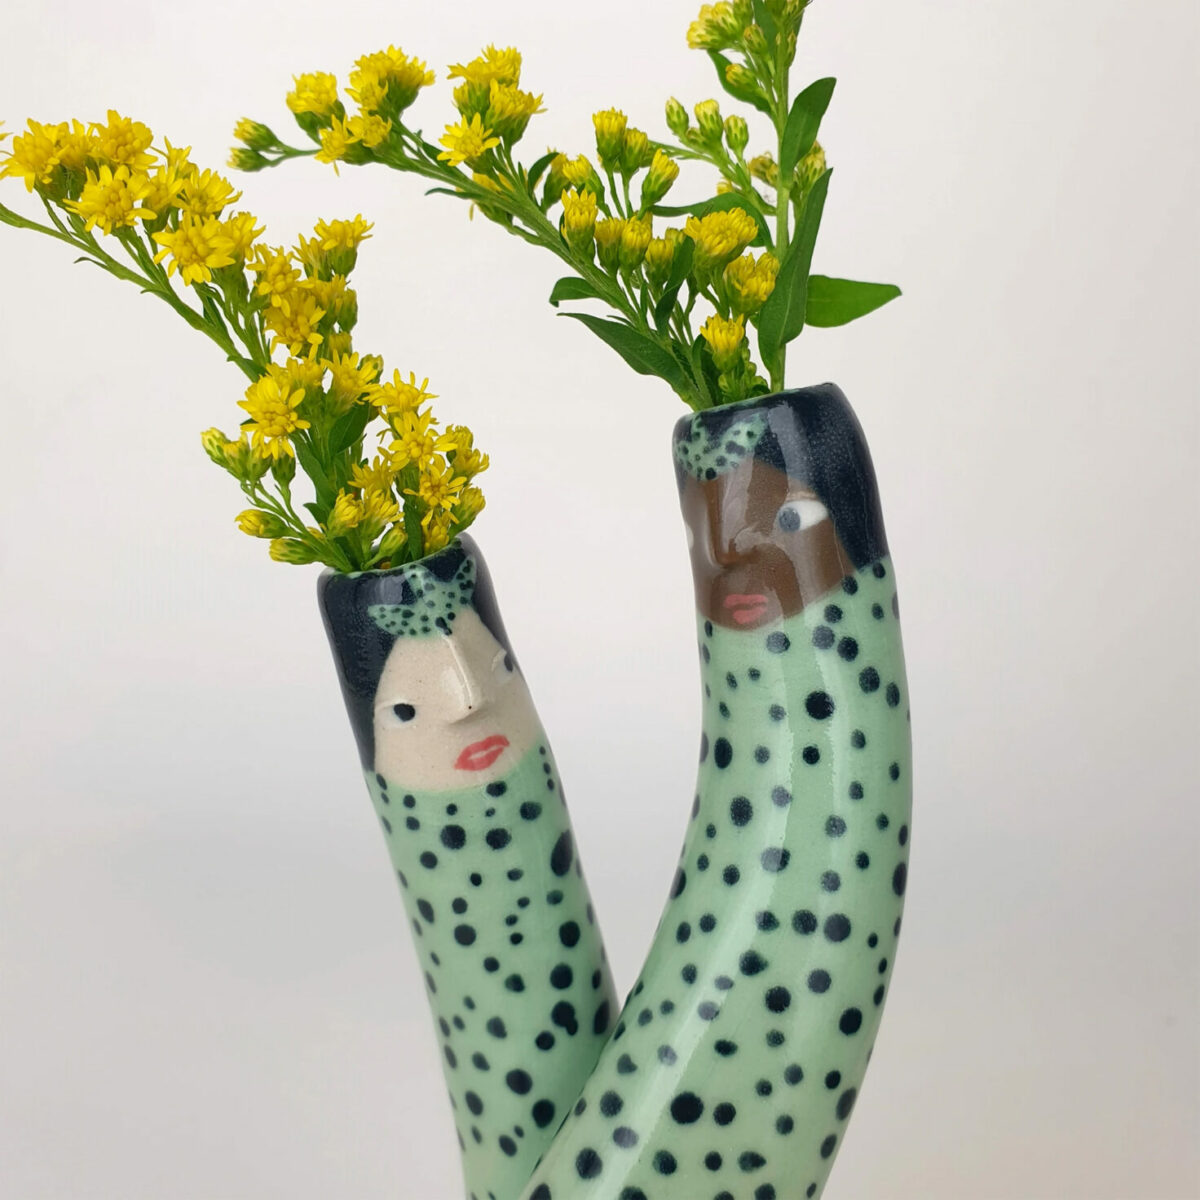 Lovely Porcelain Pieces Patterned With Quirky Cartoon Like Figures By Sandra Apperloo 7